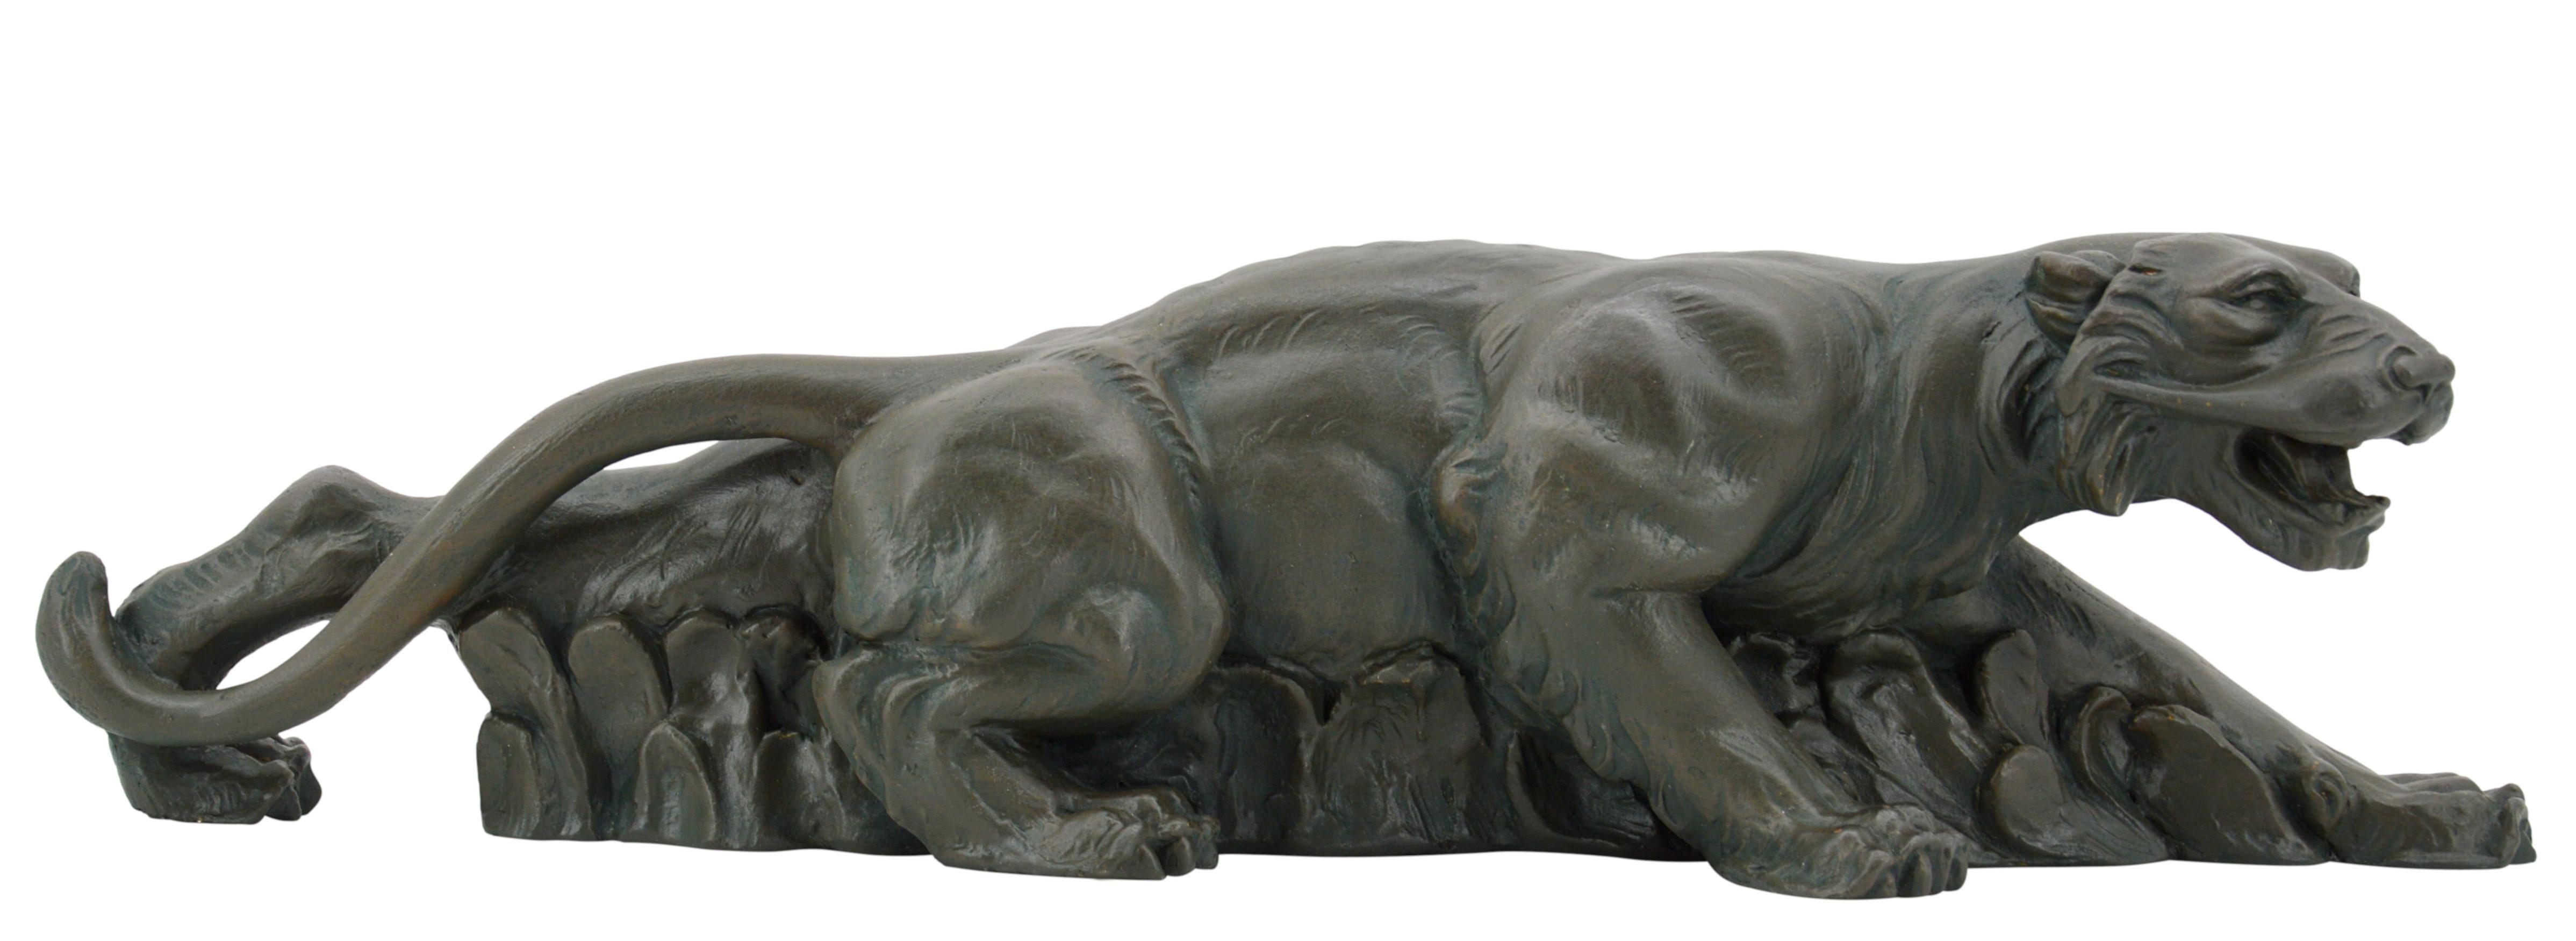 French Art Deco plaster tiger sculpture, France, 1930s. Tiger on the prowl. Old bronze patina. Measures: height : 5.1